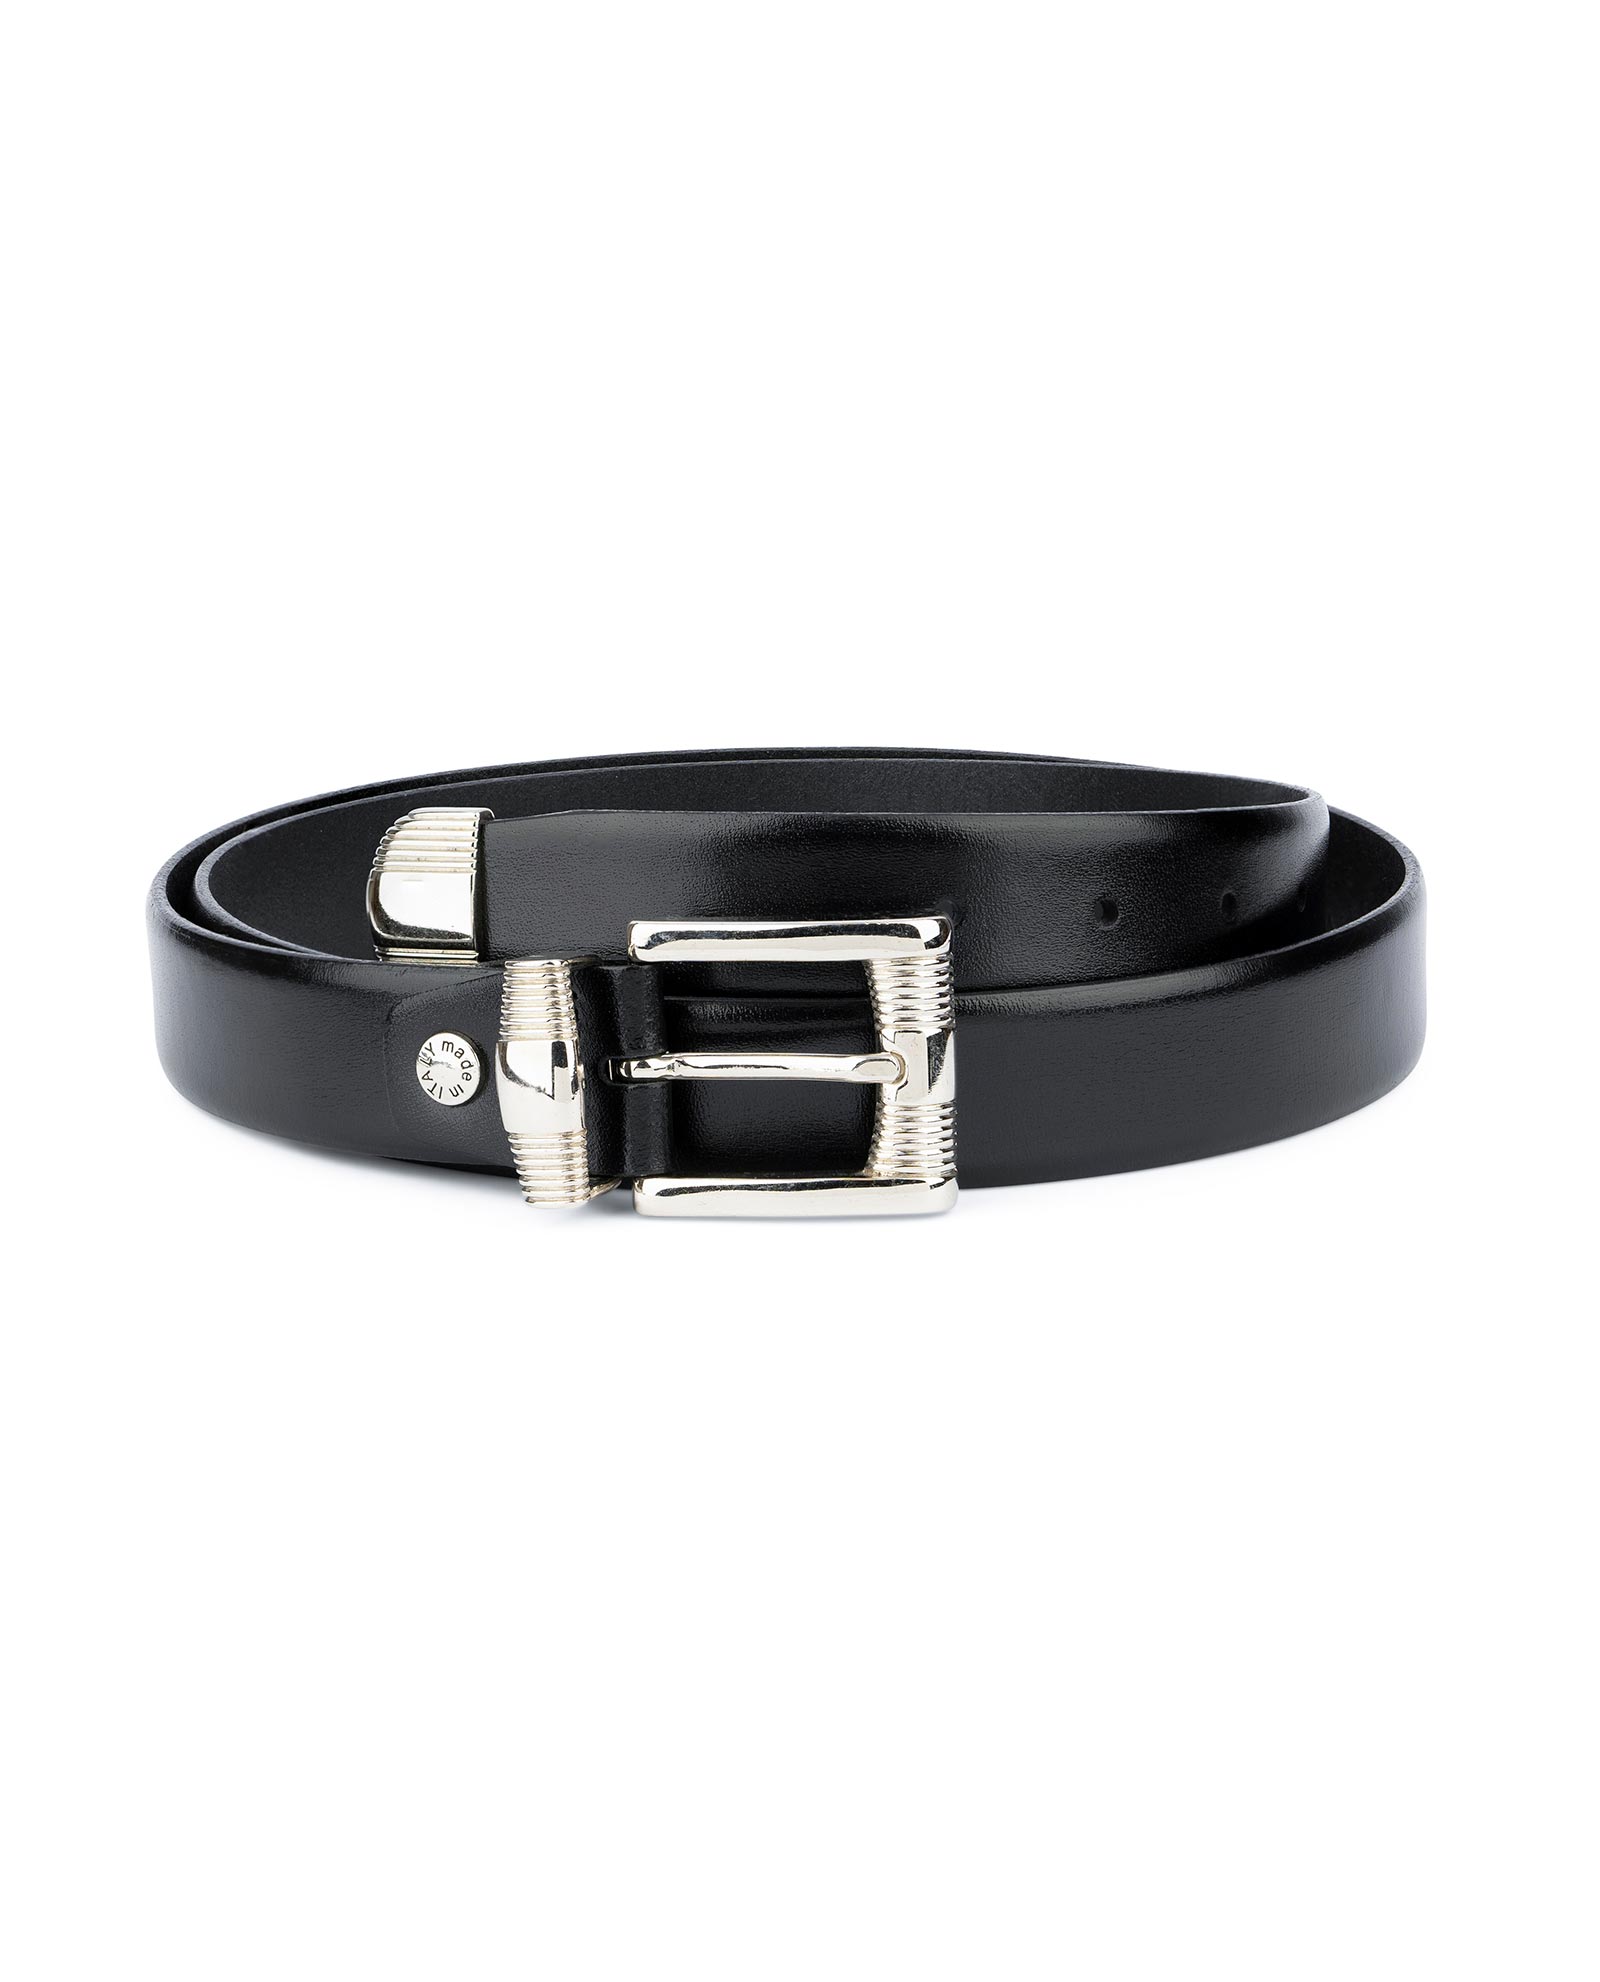 Dents Mens Reversible Leather Belt with Metal Keeper 